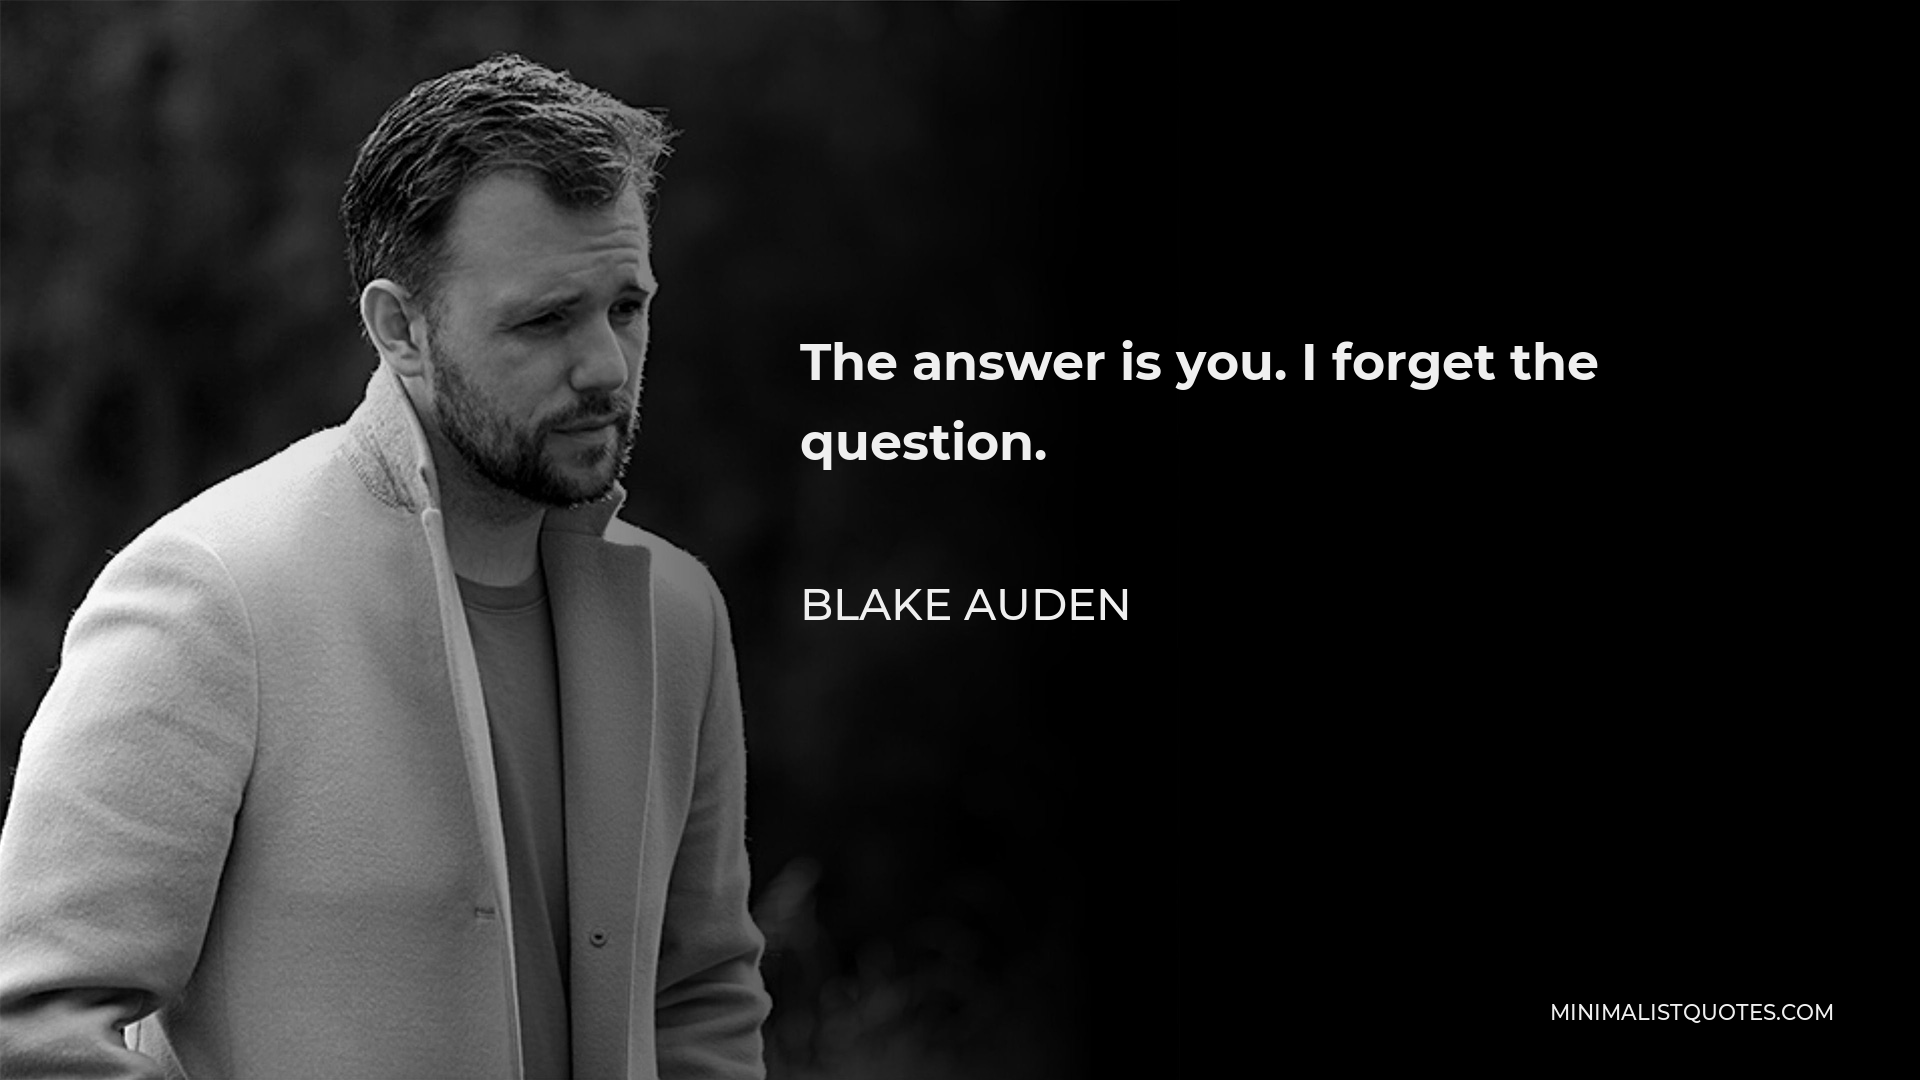 Blake Auden Quote - The answer is you. I forget the question.